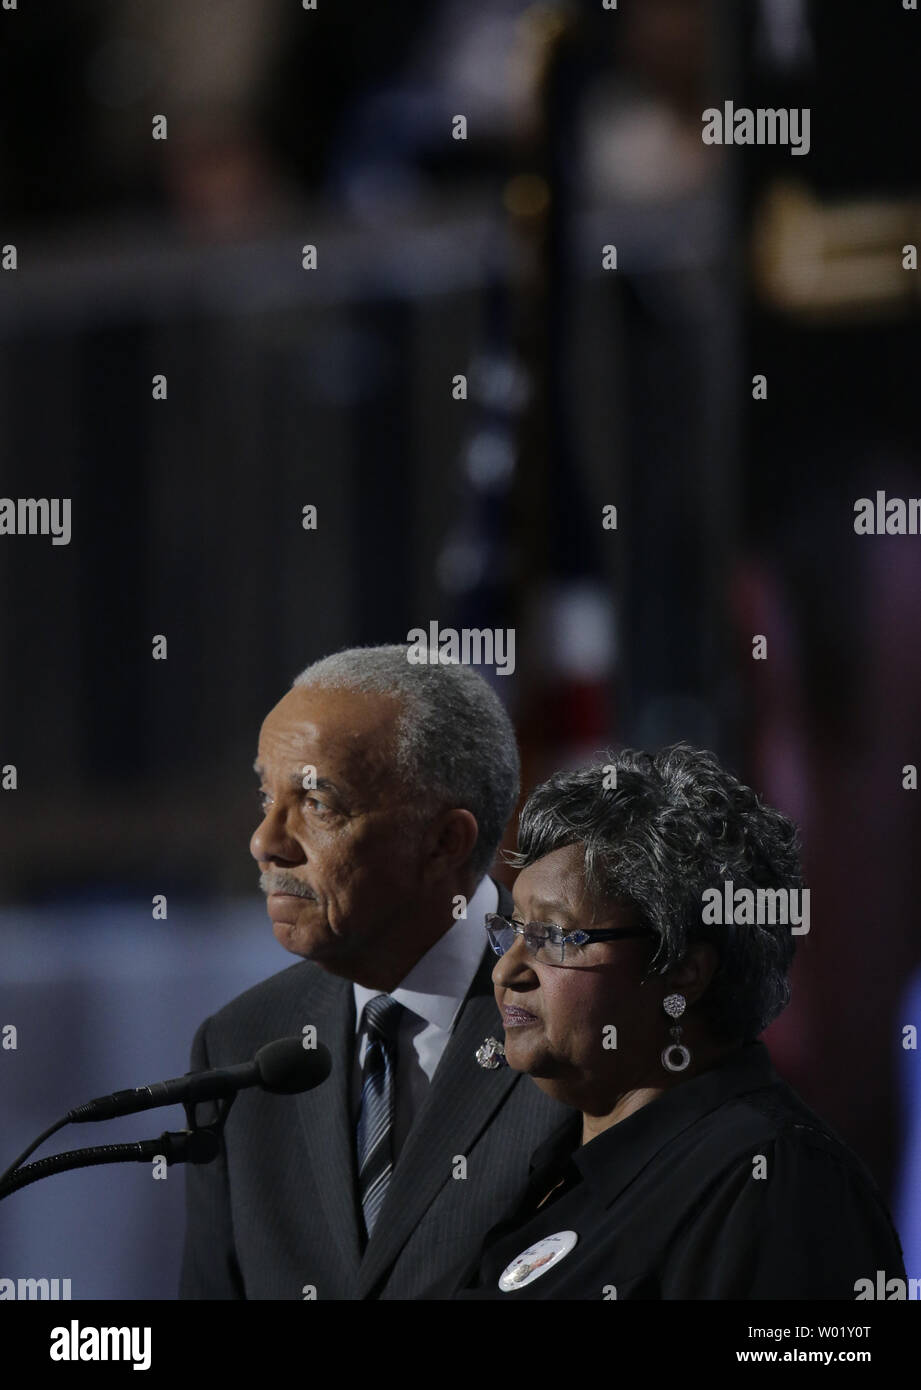 Wayne and Barbara Owens, parents of slain Cleveland police officer, speak on day four of the Democratic National Convention at Wells Fargo Center in Philadelphia, Pennsylvania on July 28, 2016.  Hillary Clinton claims the Democratic Party's nomination for president.   Photo by Ray Stubblebine/UPI Stock Photo